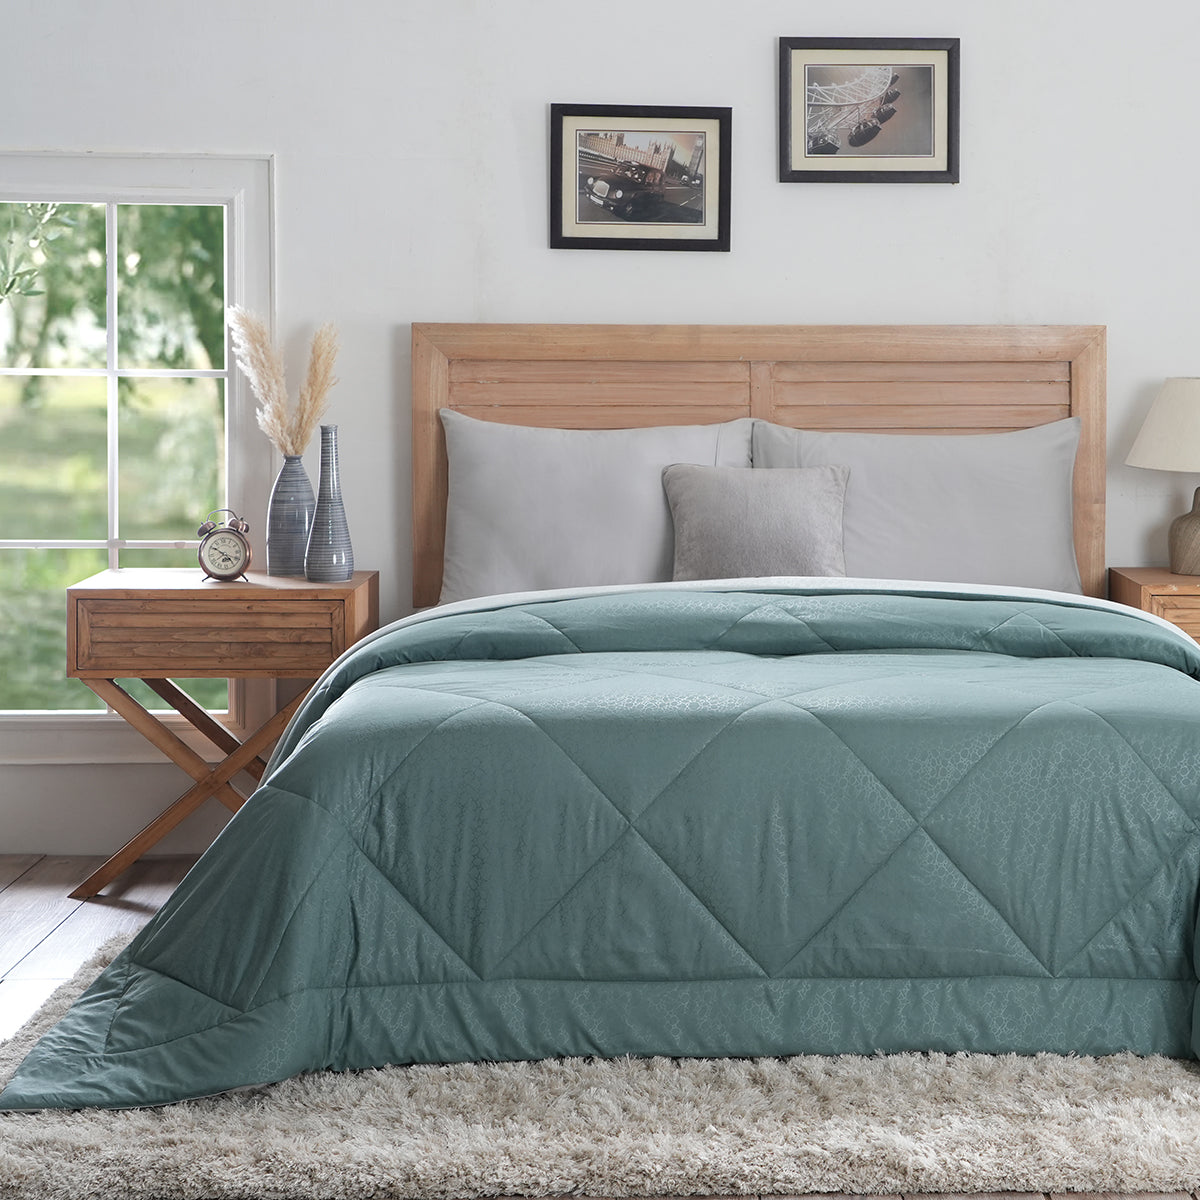 Hermosa Glister Pebble Teal/Mint Quilt